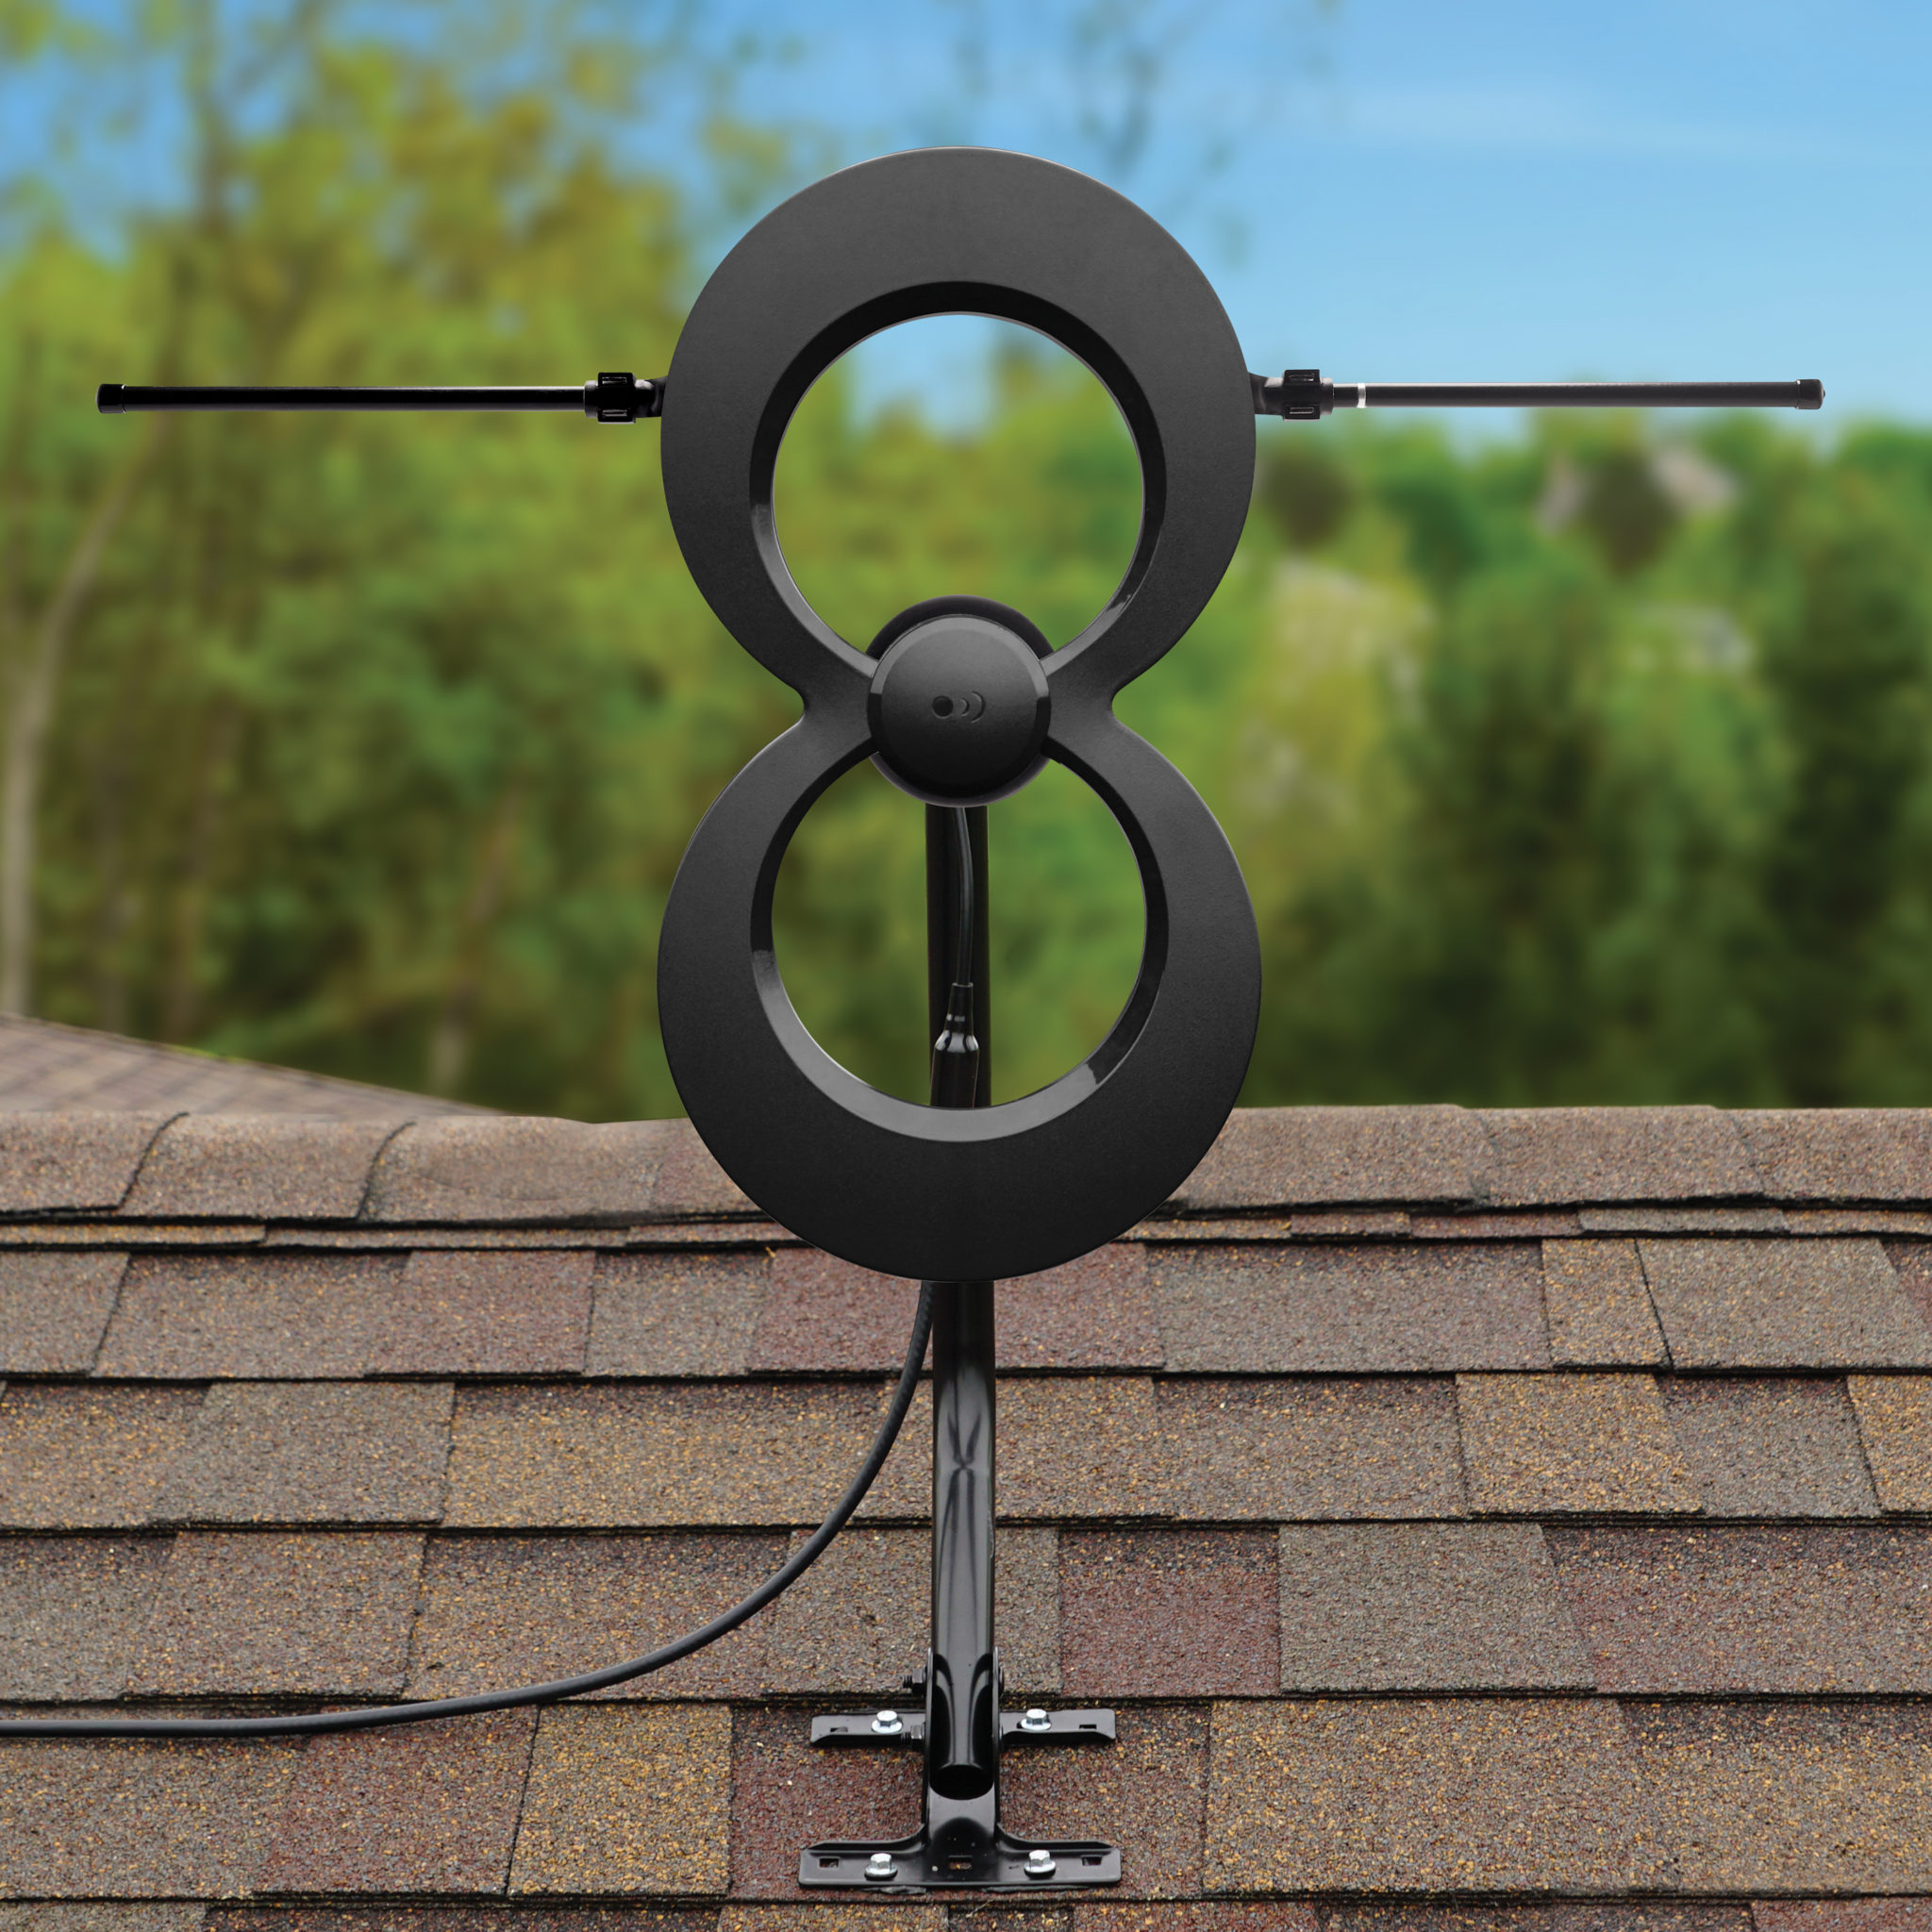 EXPIRED: Save 49% on Antennas Direct ClearStream Antenna